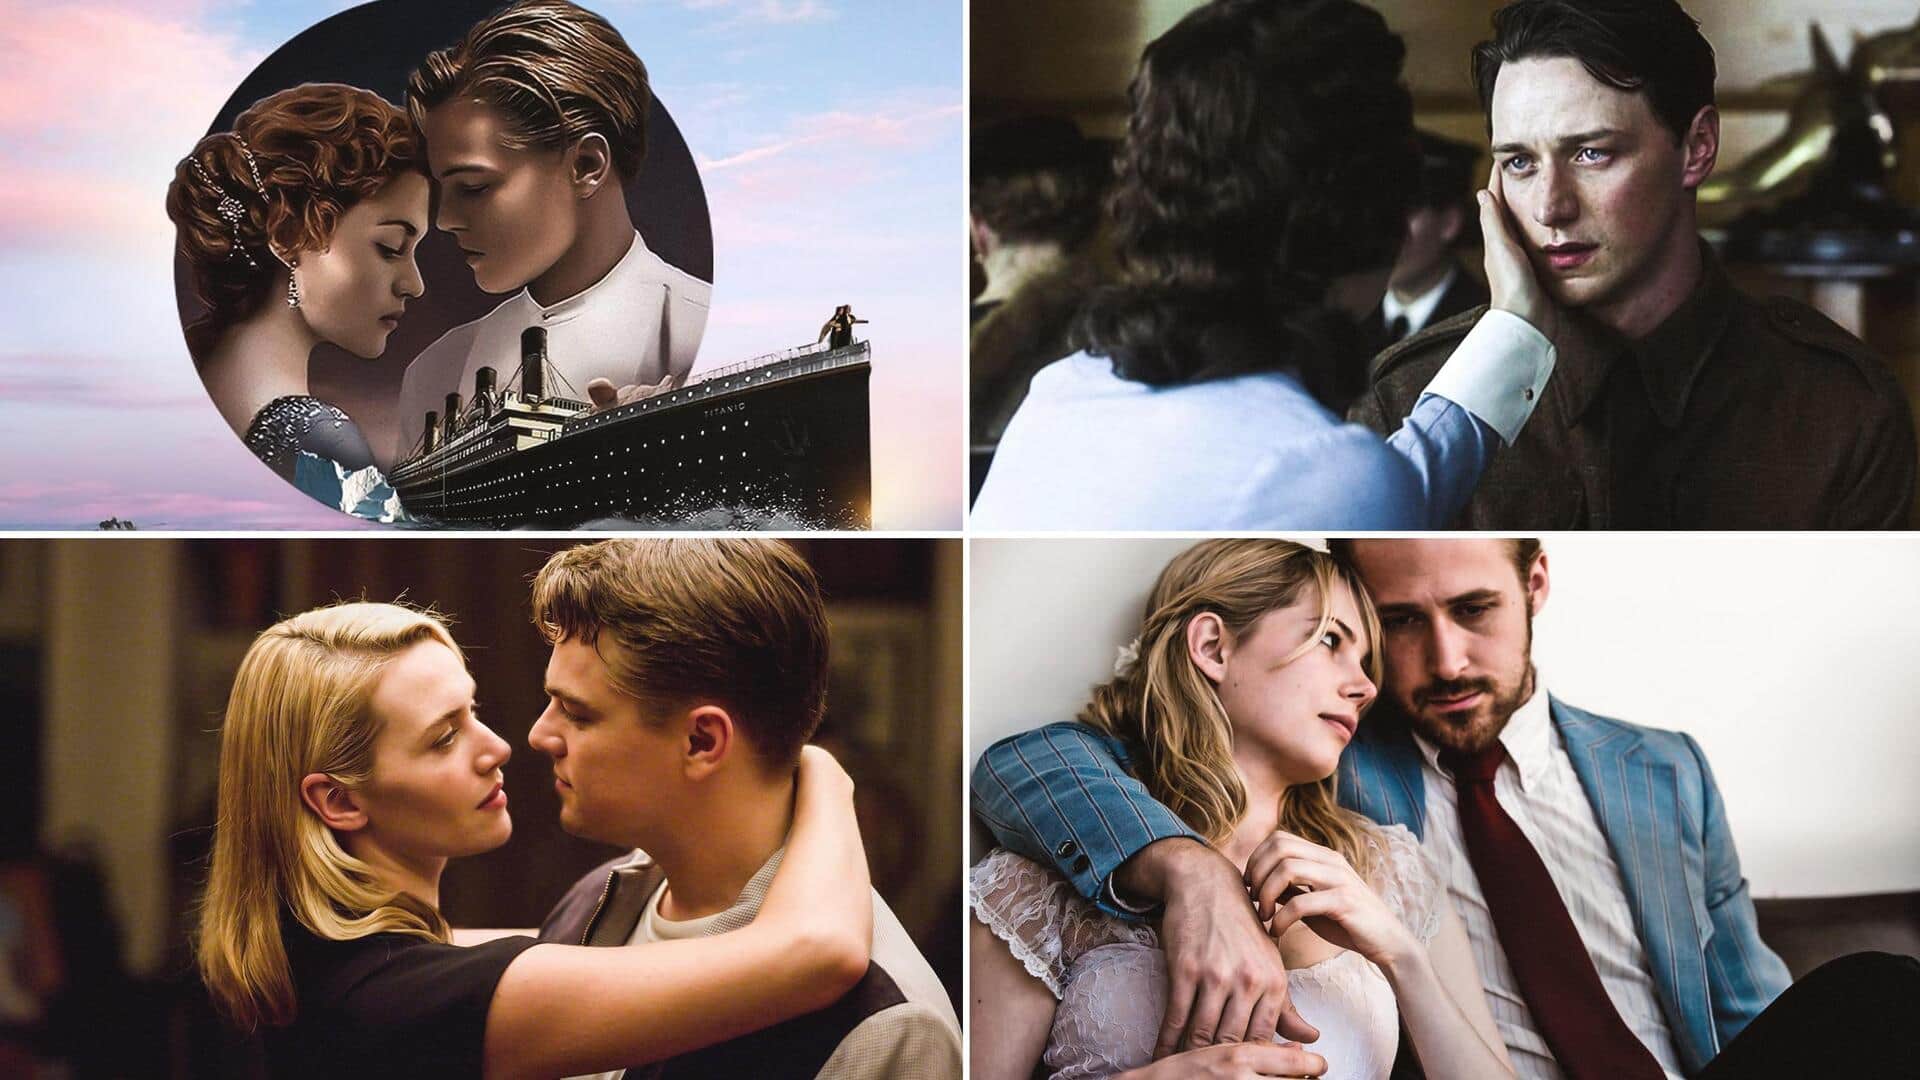 'Titanic' to 'Blue Valentine': Hollywood romantic films with sad endings 